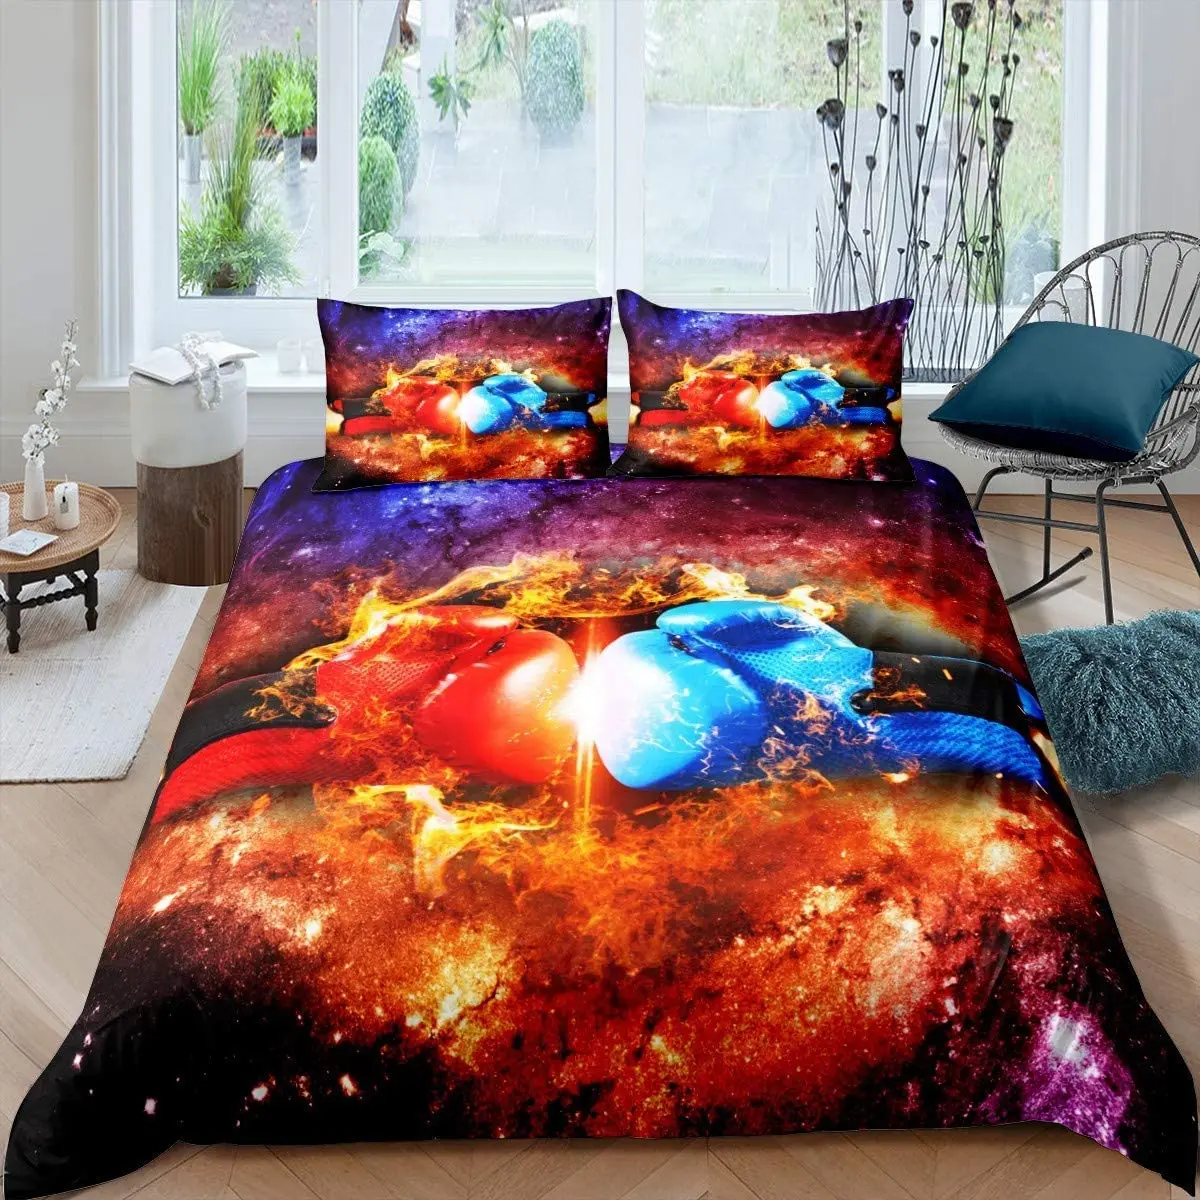 

Set Sports Games Theme Twin Bedding Set Microfiber Boxing Gloves Athlete Silhouette Queen King Quilt Cover Boxing Duvet Cover